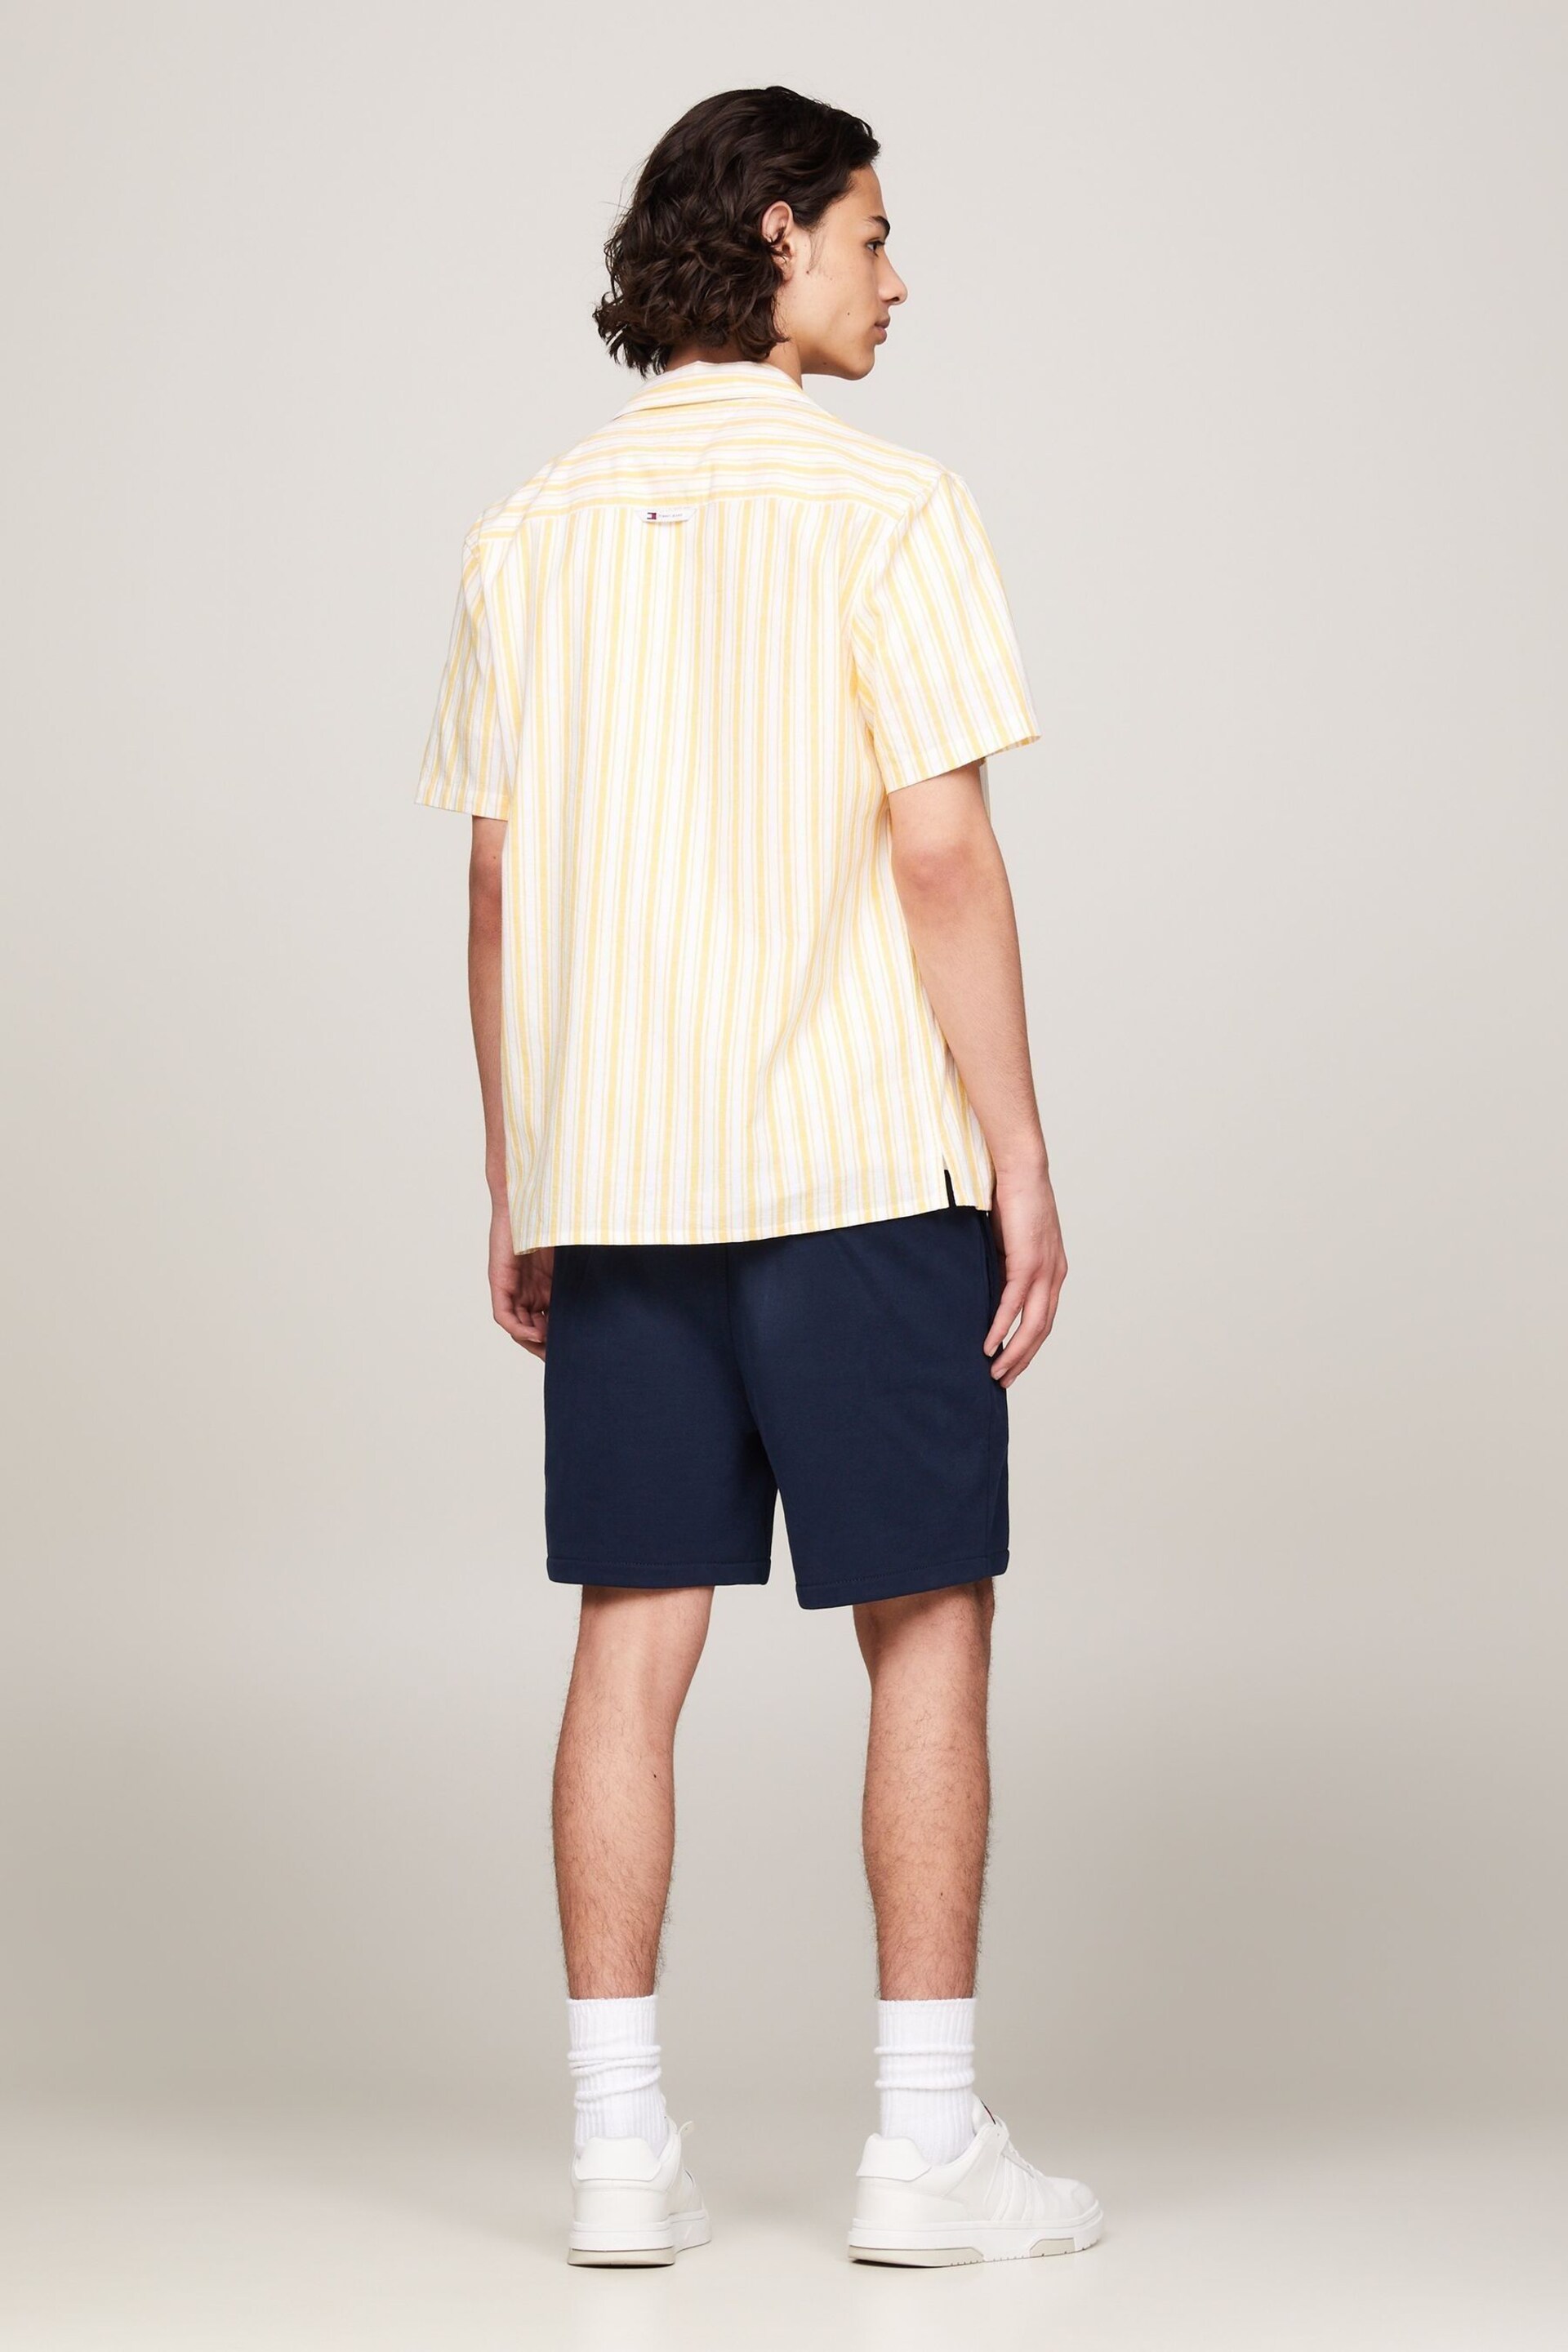 Tommy Jeans Stripe Linen Shirt - Image 2 of 6